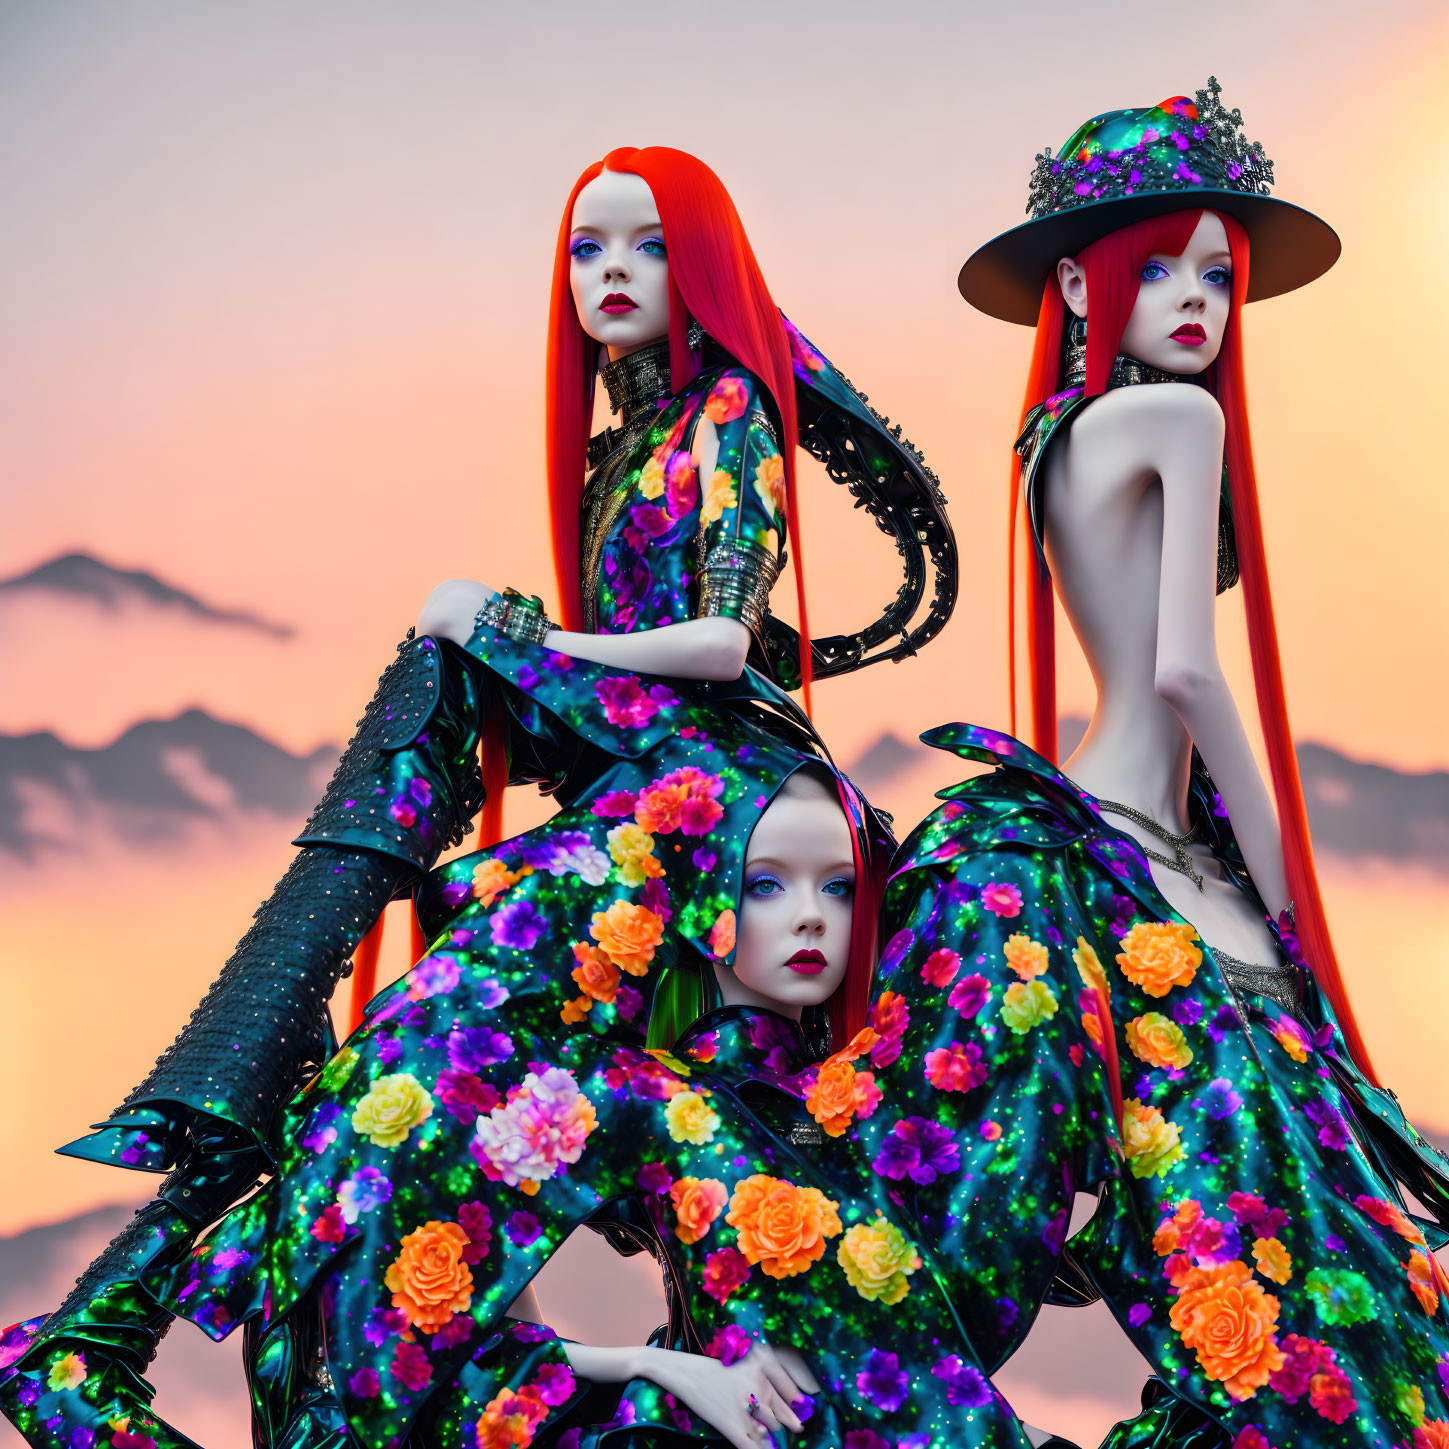 Vibrant mannequins with red hair in floral outfits against orange sky